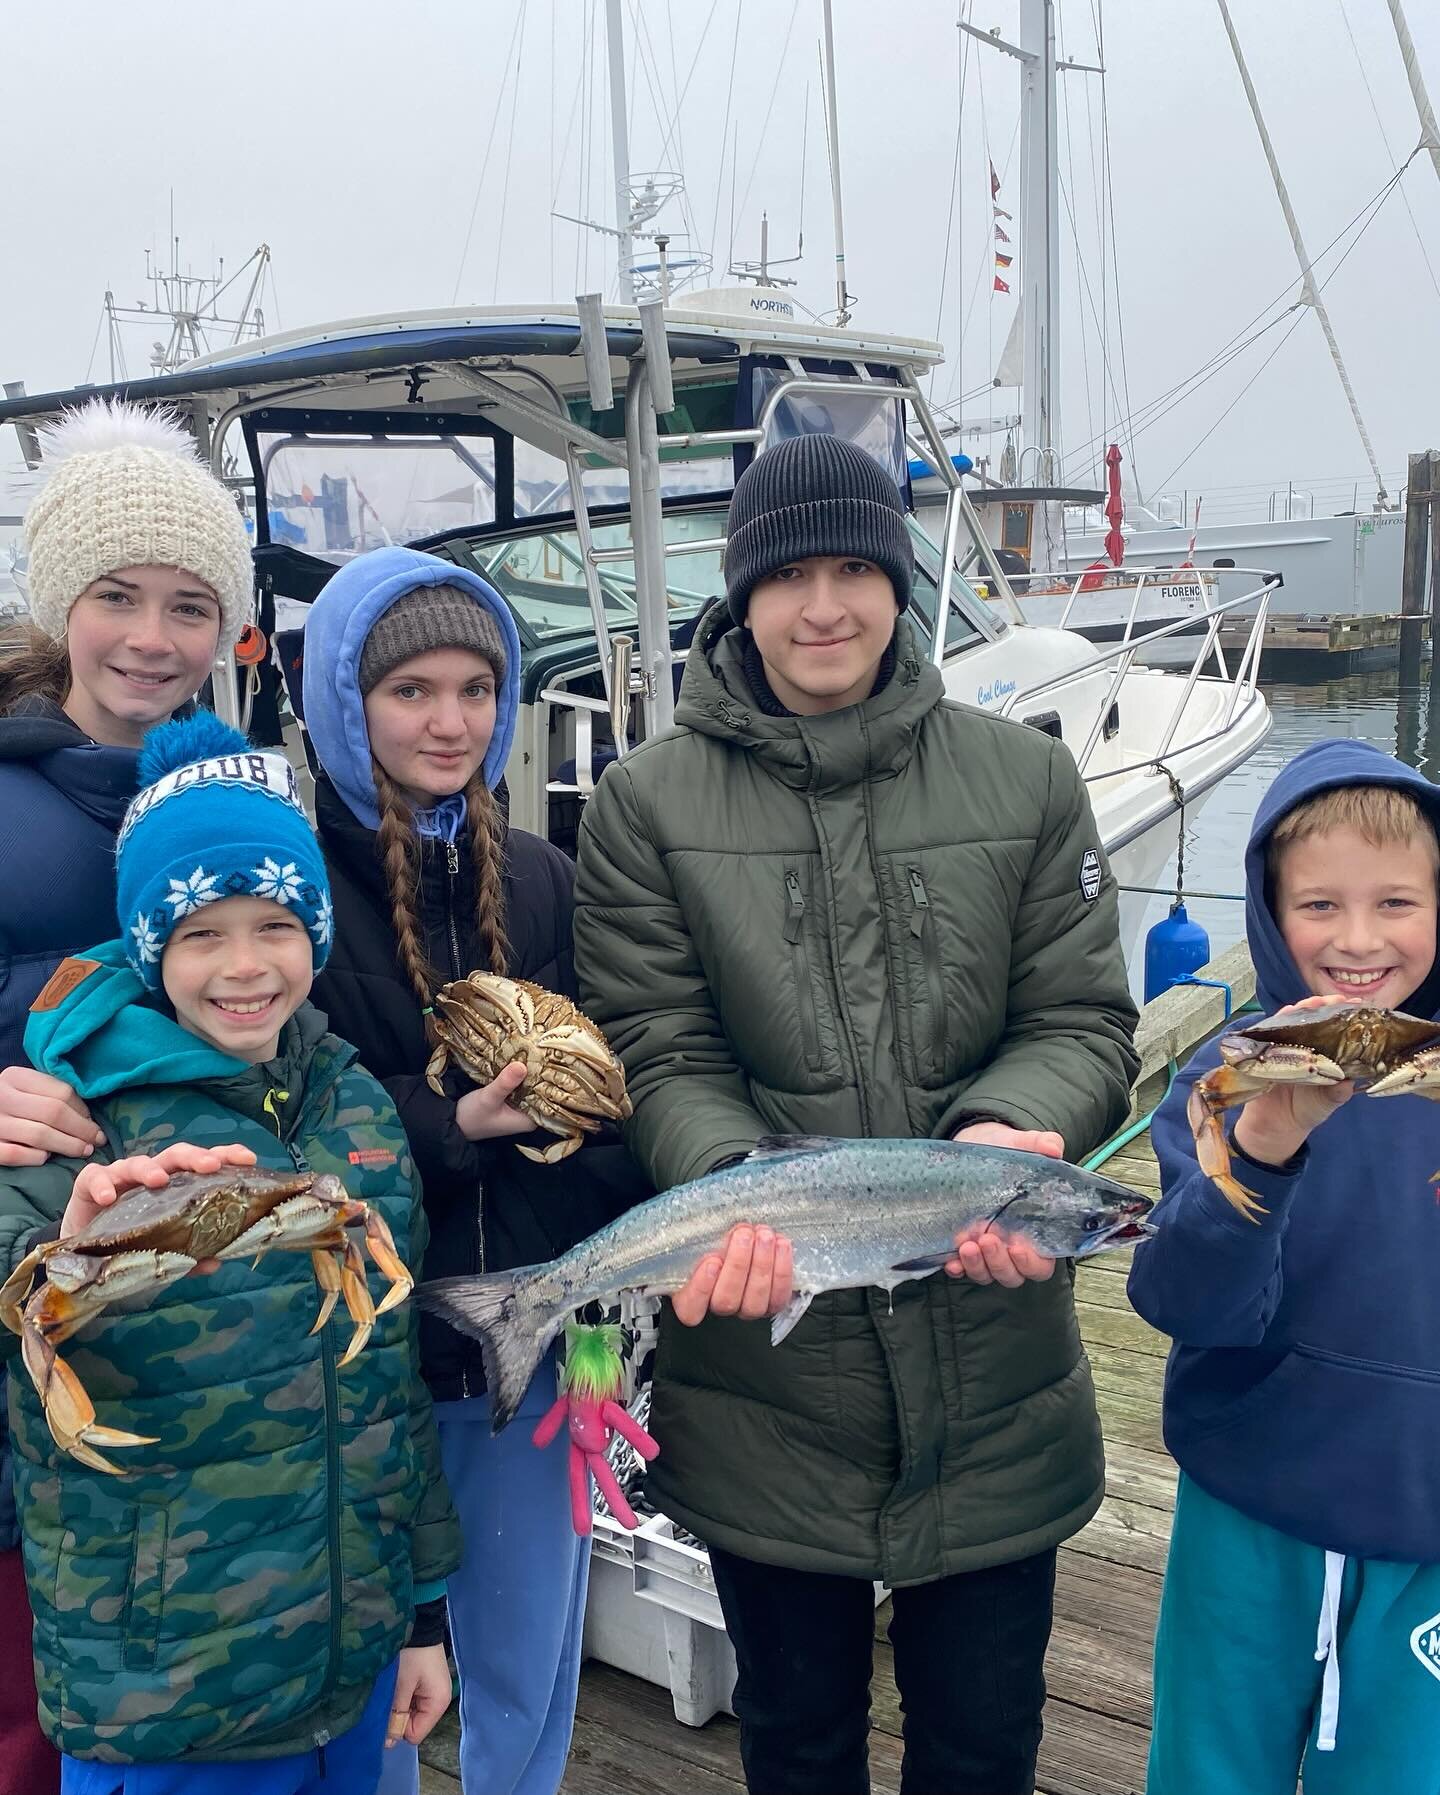 Winter spring fishing with family and new friends from Ukraine! Lots of action, a nice dinner fish and feed of crab #tourismvictoria #chinooksalmon #dungenesscrab #familyfishing #ukraine🇺🇦